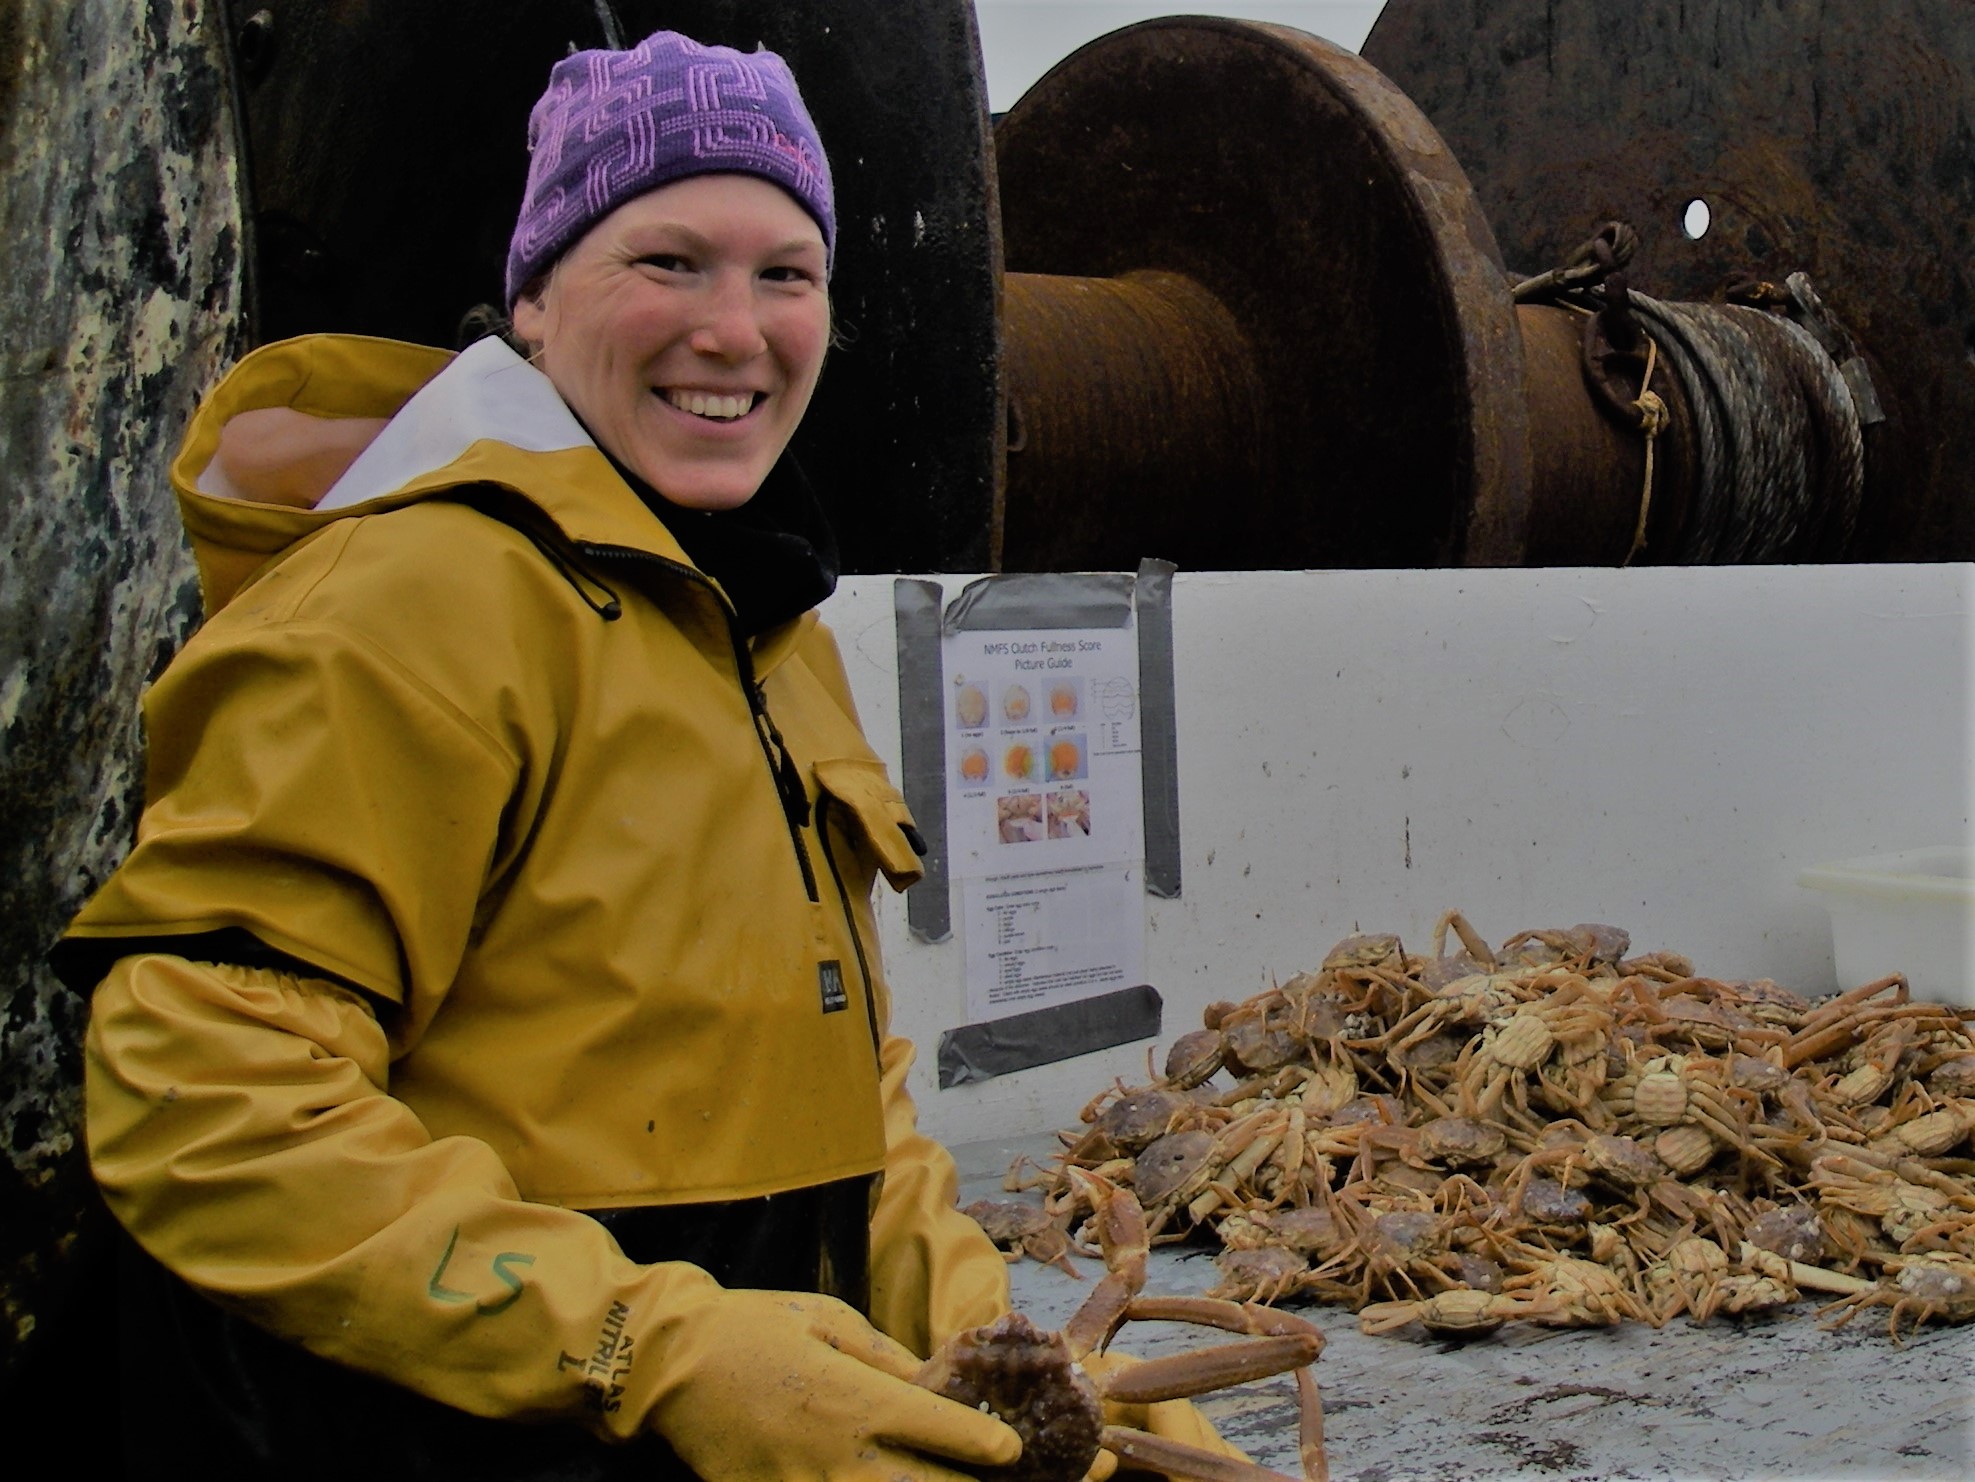 Fish Sister Profile: Laura Slater, fisheries biologist with a diversity of experiences in management, recovery, and production